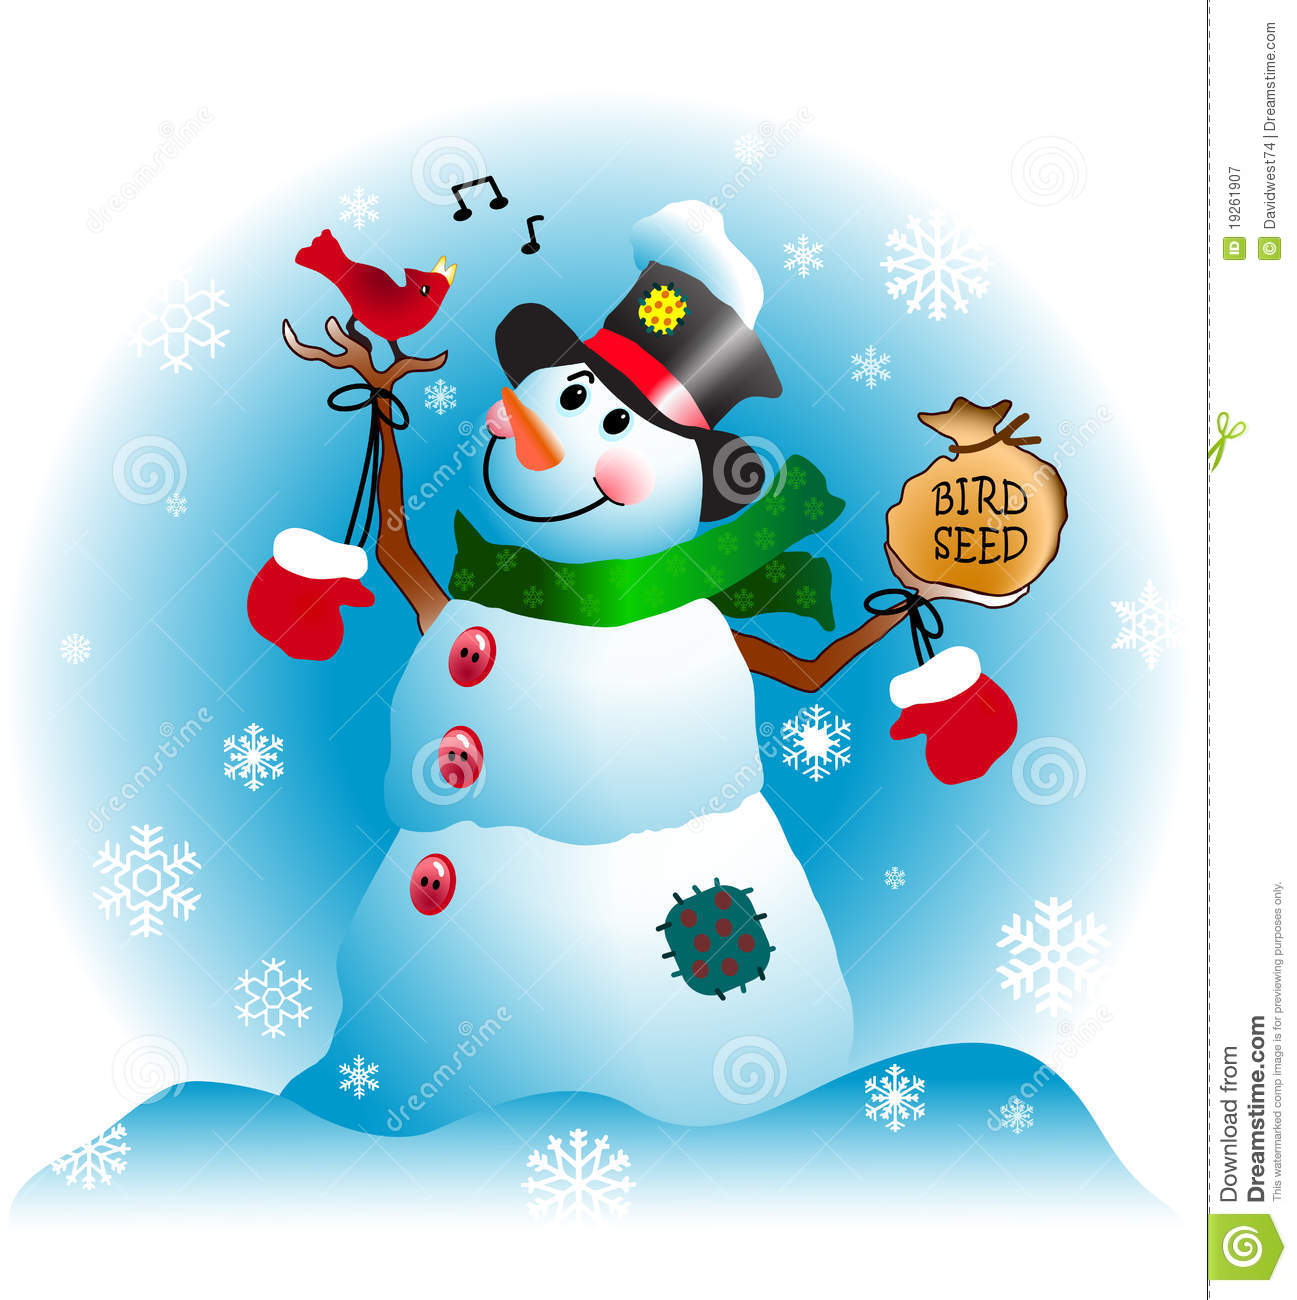 Christmas Snowman With Cardinal Royalty Free Stock Photography   Image